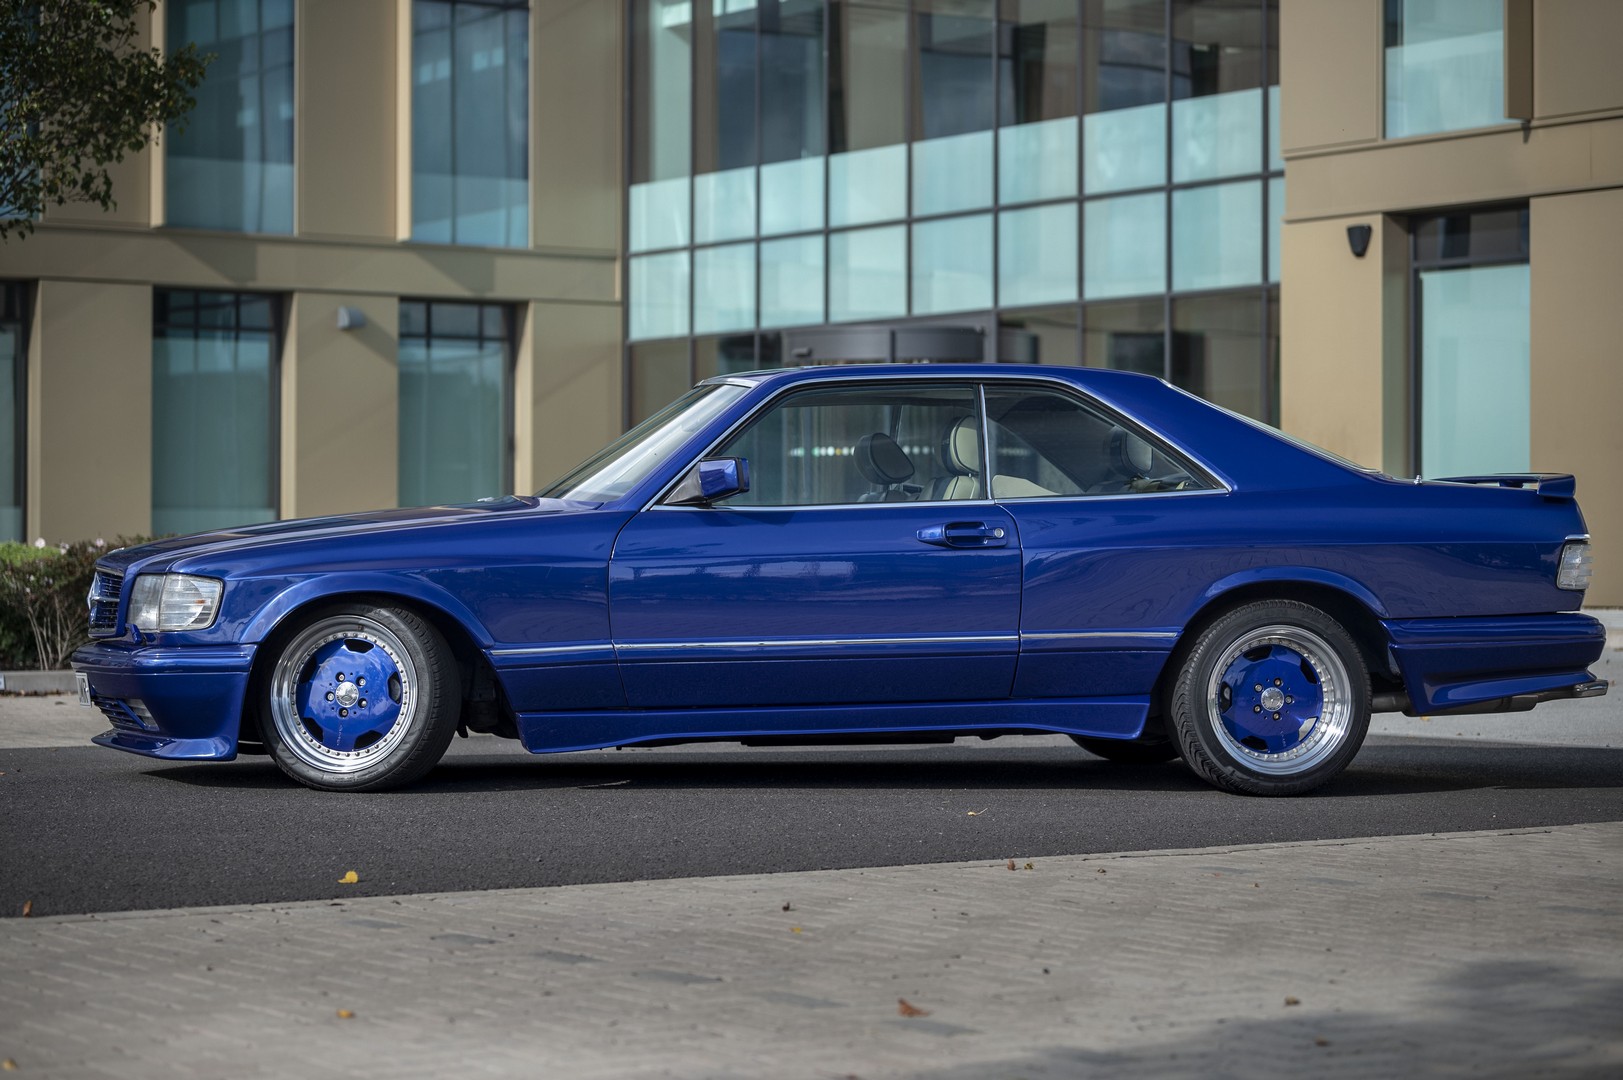 This Very Blue And Wide 1987 Mercedes Benz 560sec Amg Sold For Just Under k Autoevolution